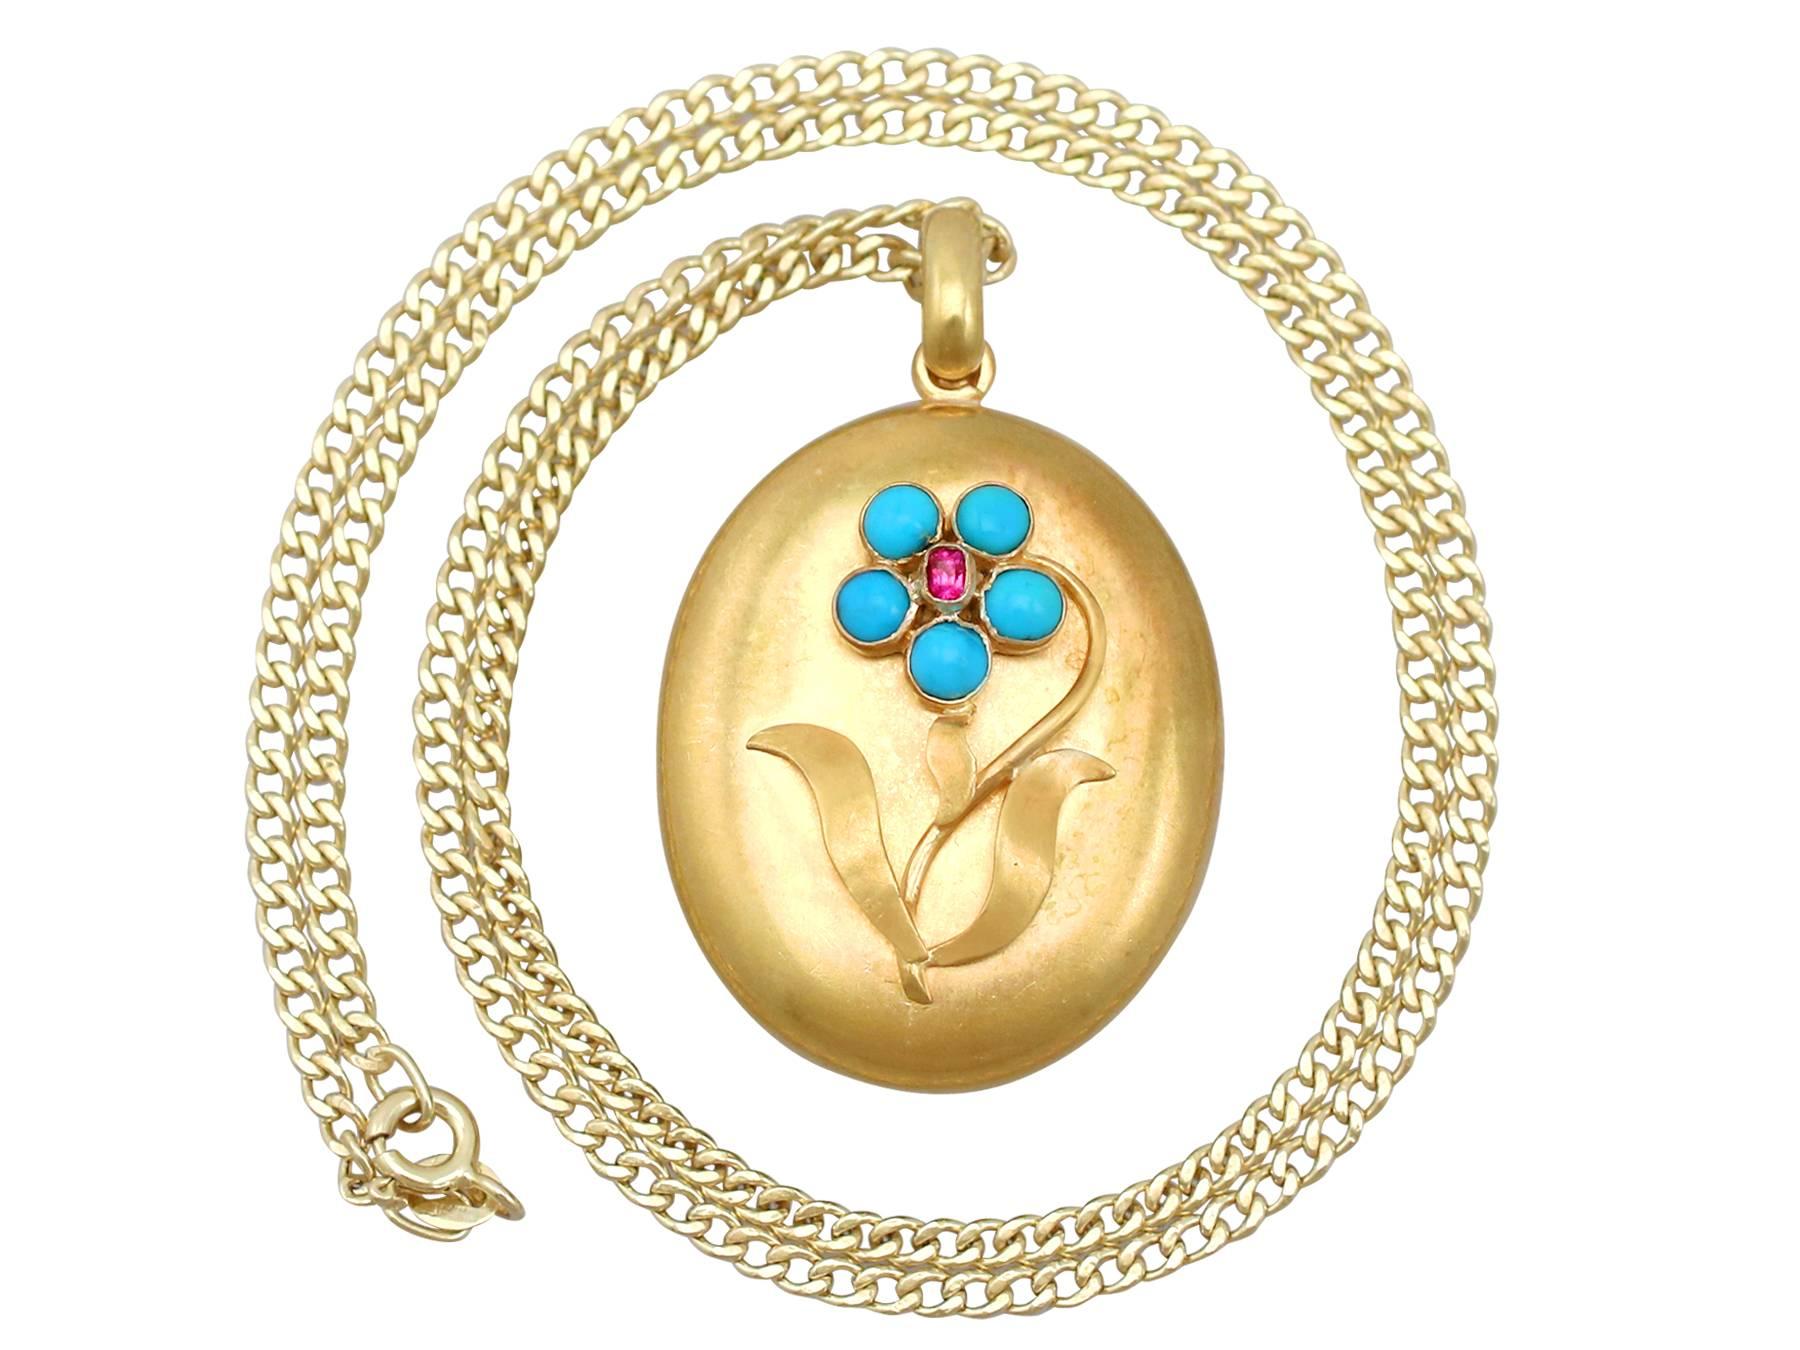 An impressive antique Victorian 1860s 0.95 carat turquoise and 0.04 carat ruby, 22 karat yellow gold locket pendant; part of our diverse antique jewelry and estate jewelry collections.

This fine and impressive antique Victorian locket has been